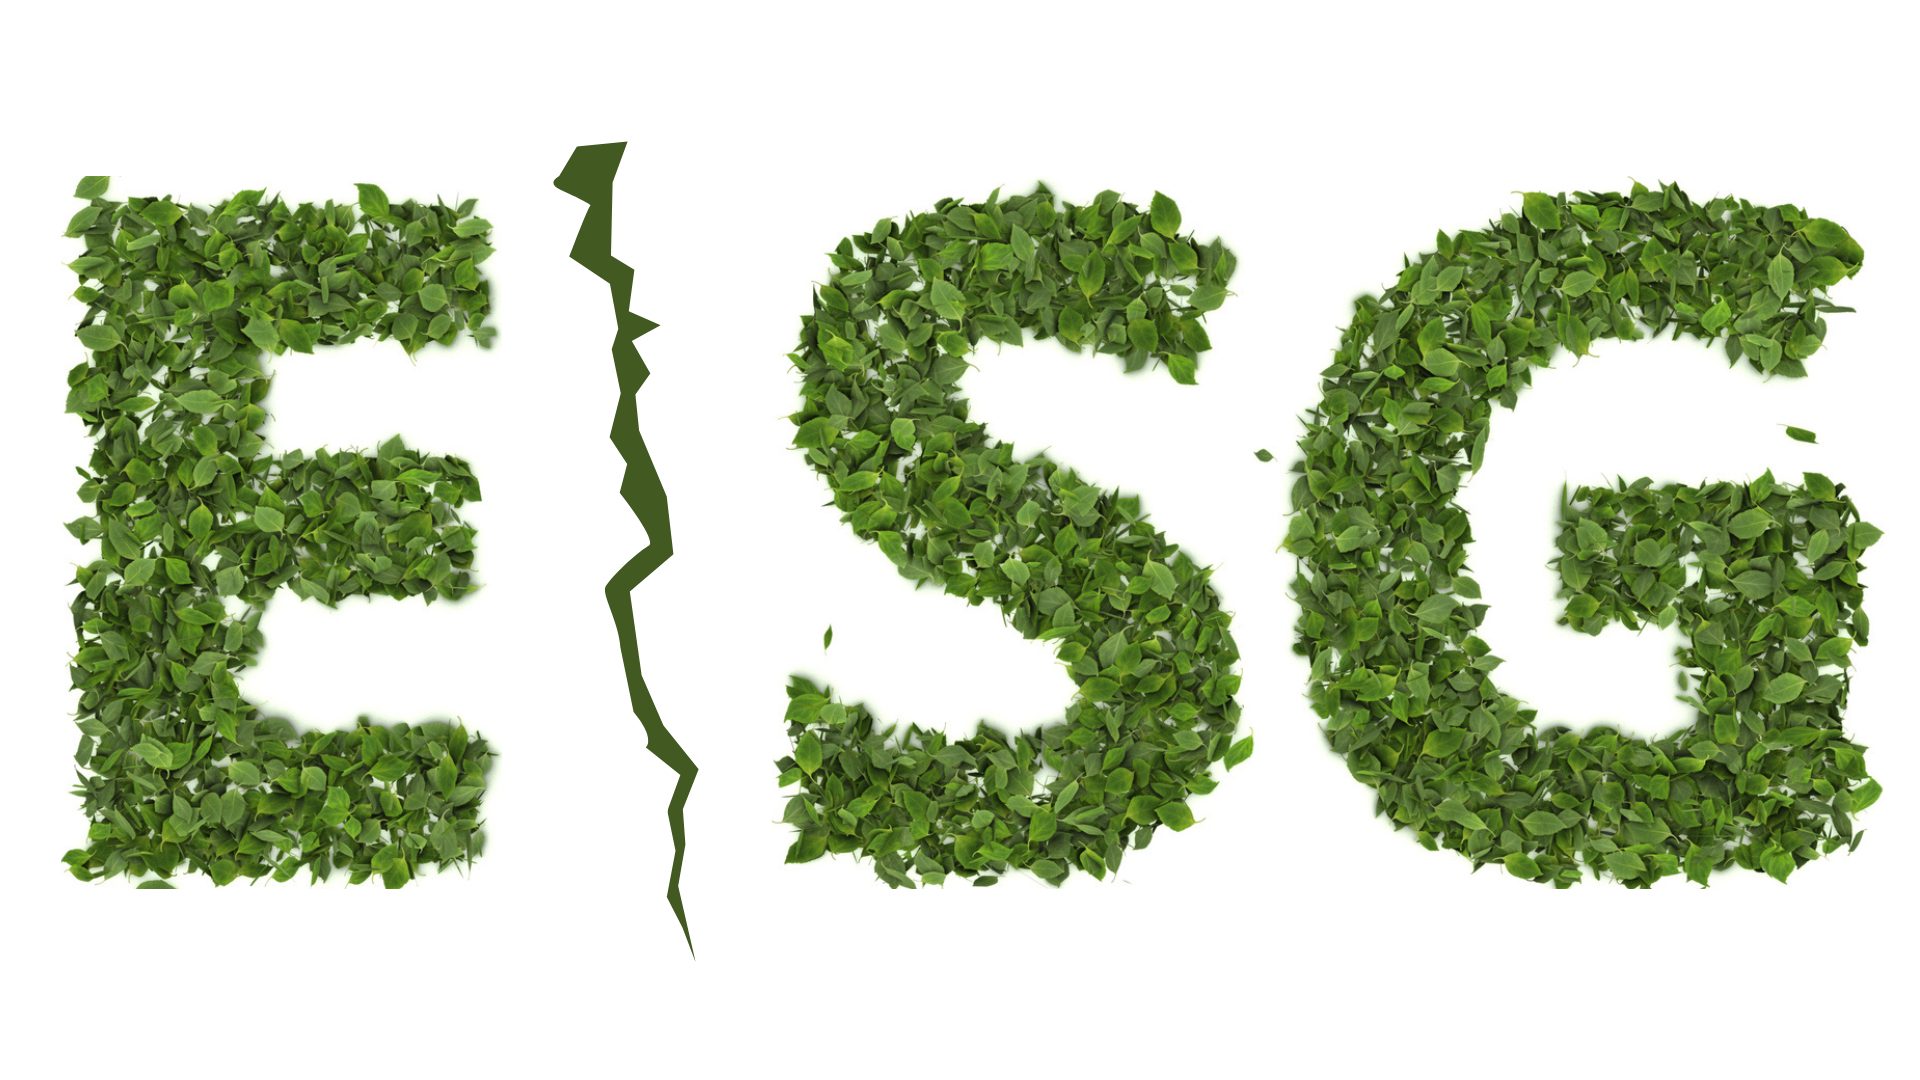 ESG letters shaped out of leaves